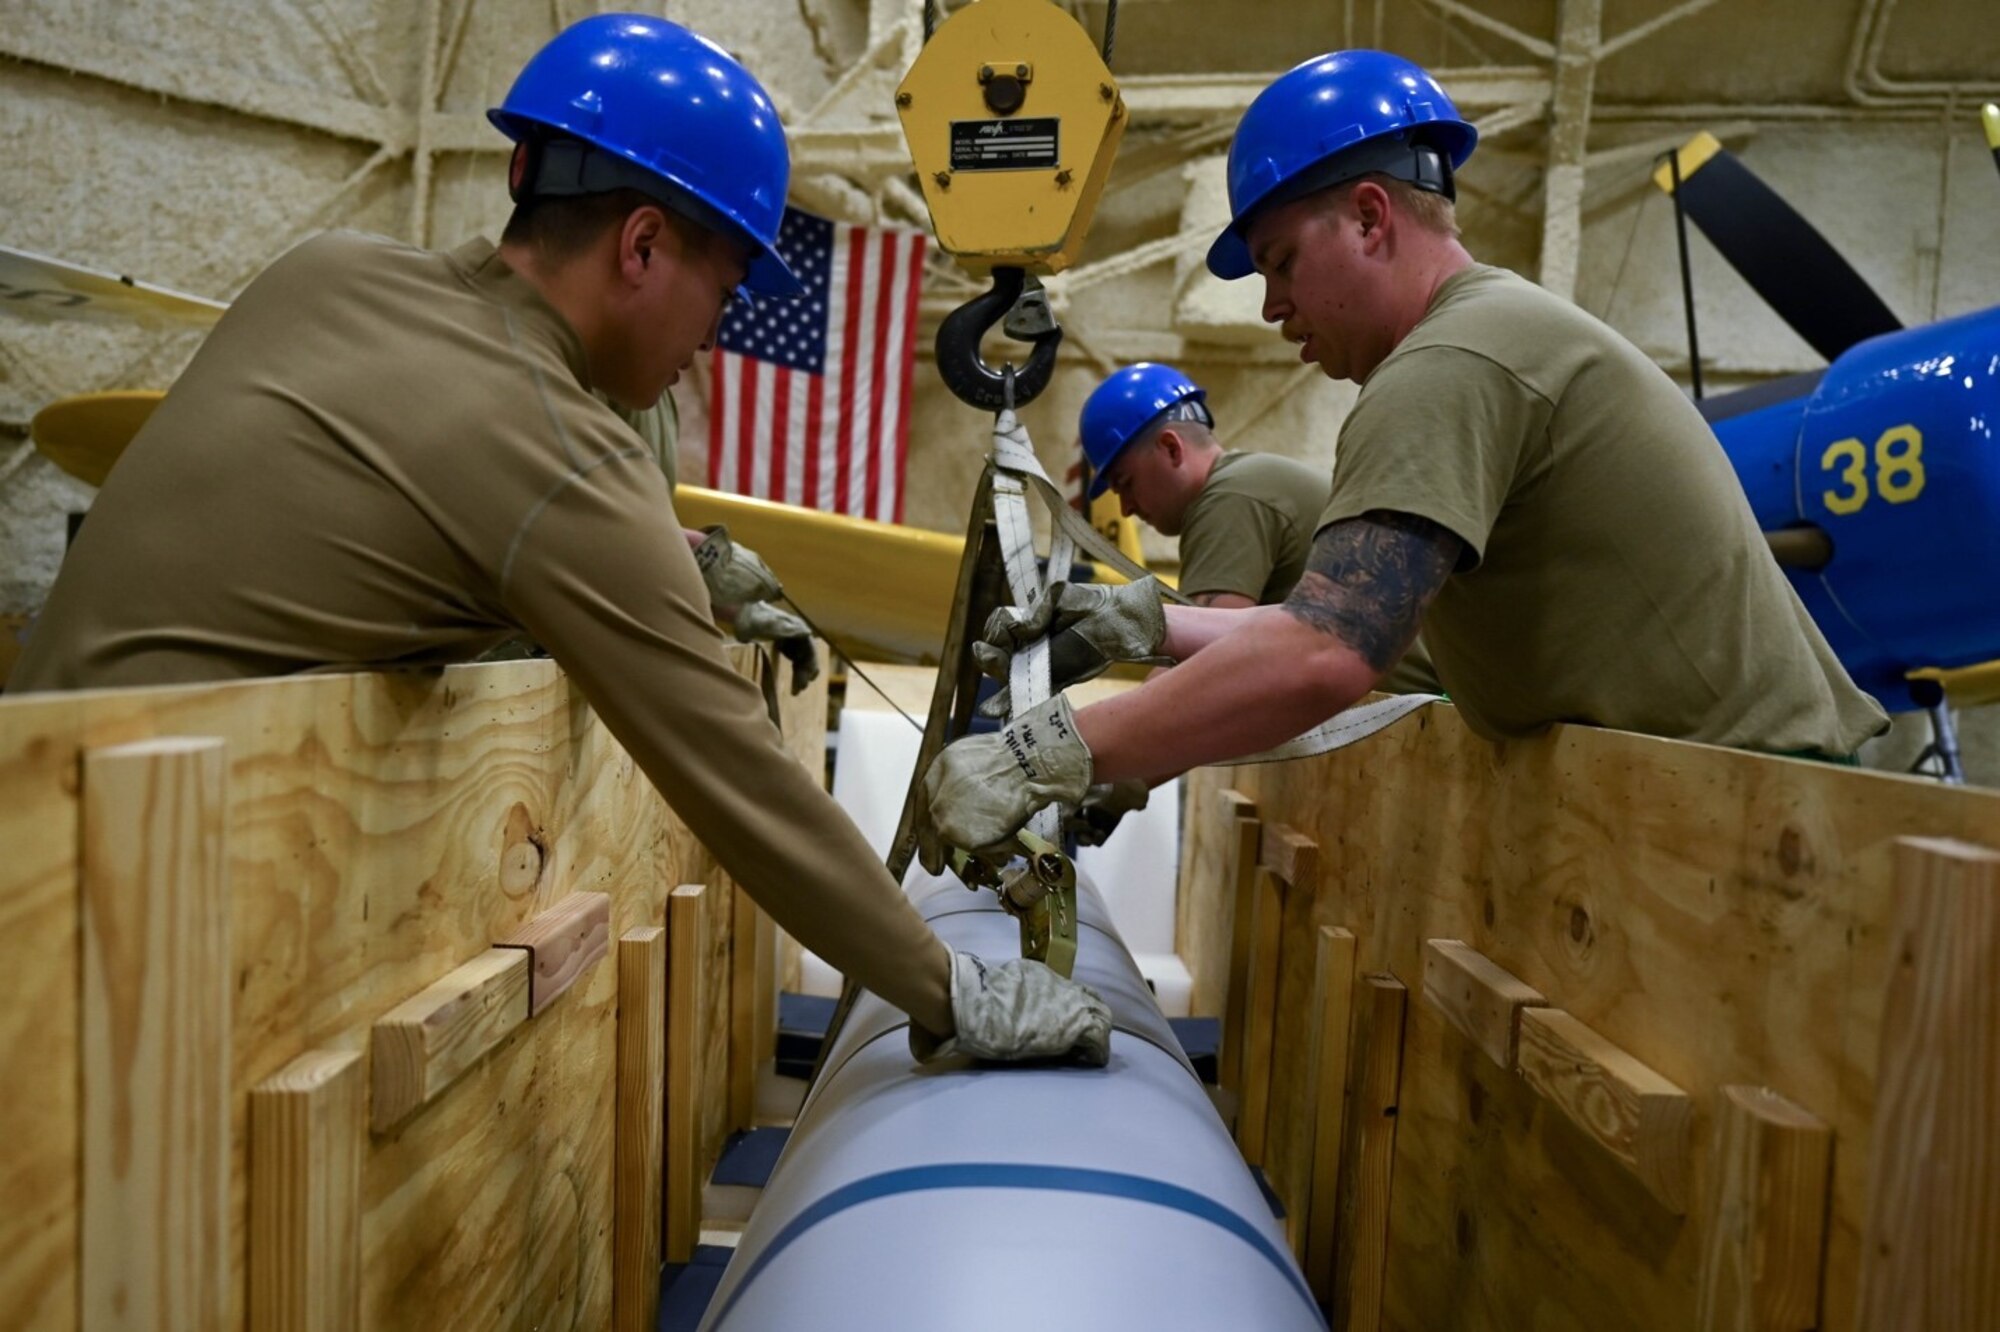 Airmen from the 28th Maintenance Squadron prepare to hang a Joint- Air-to-Standoff Missile in the South Dakota Air and Space Museum, March 5, 2022.